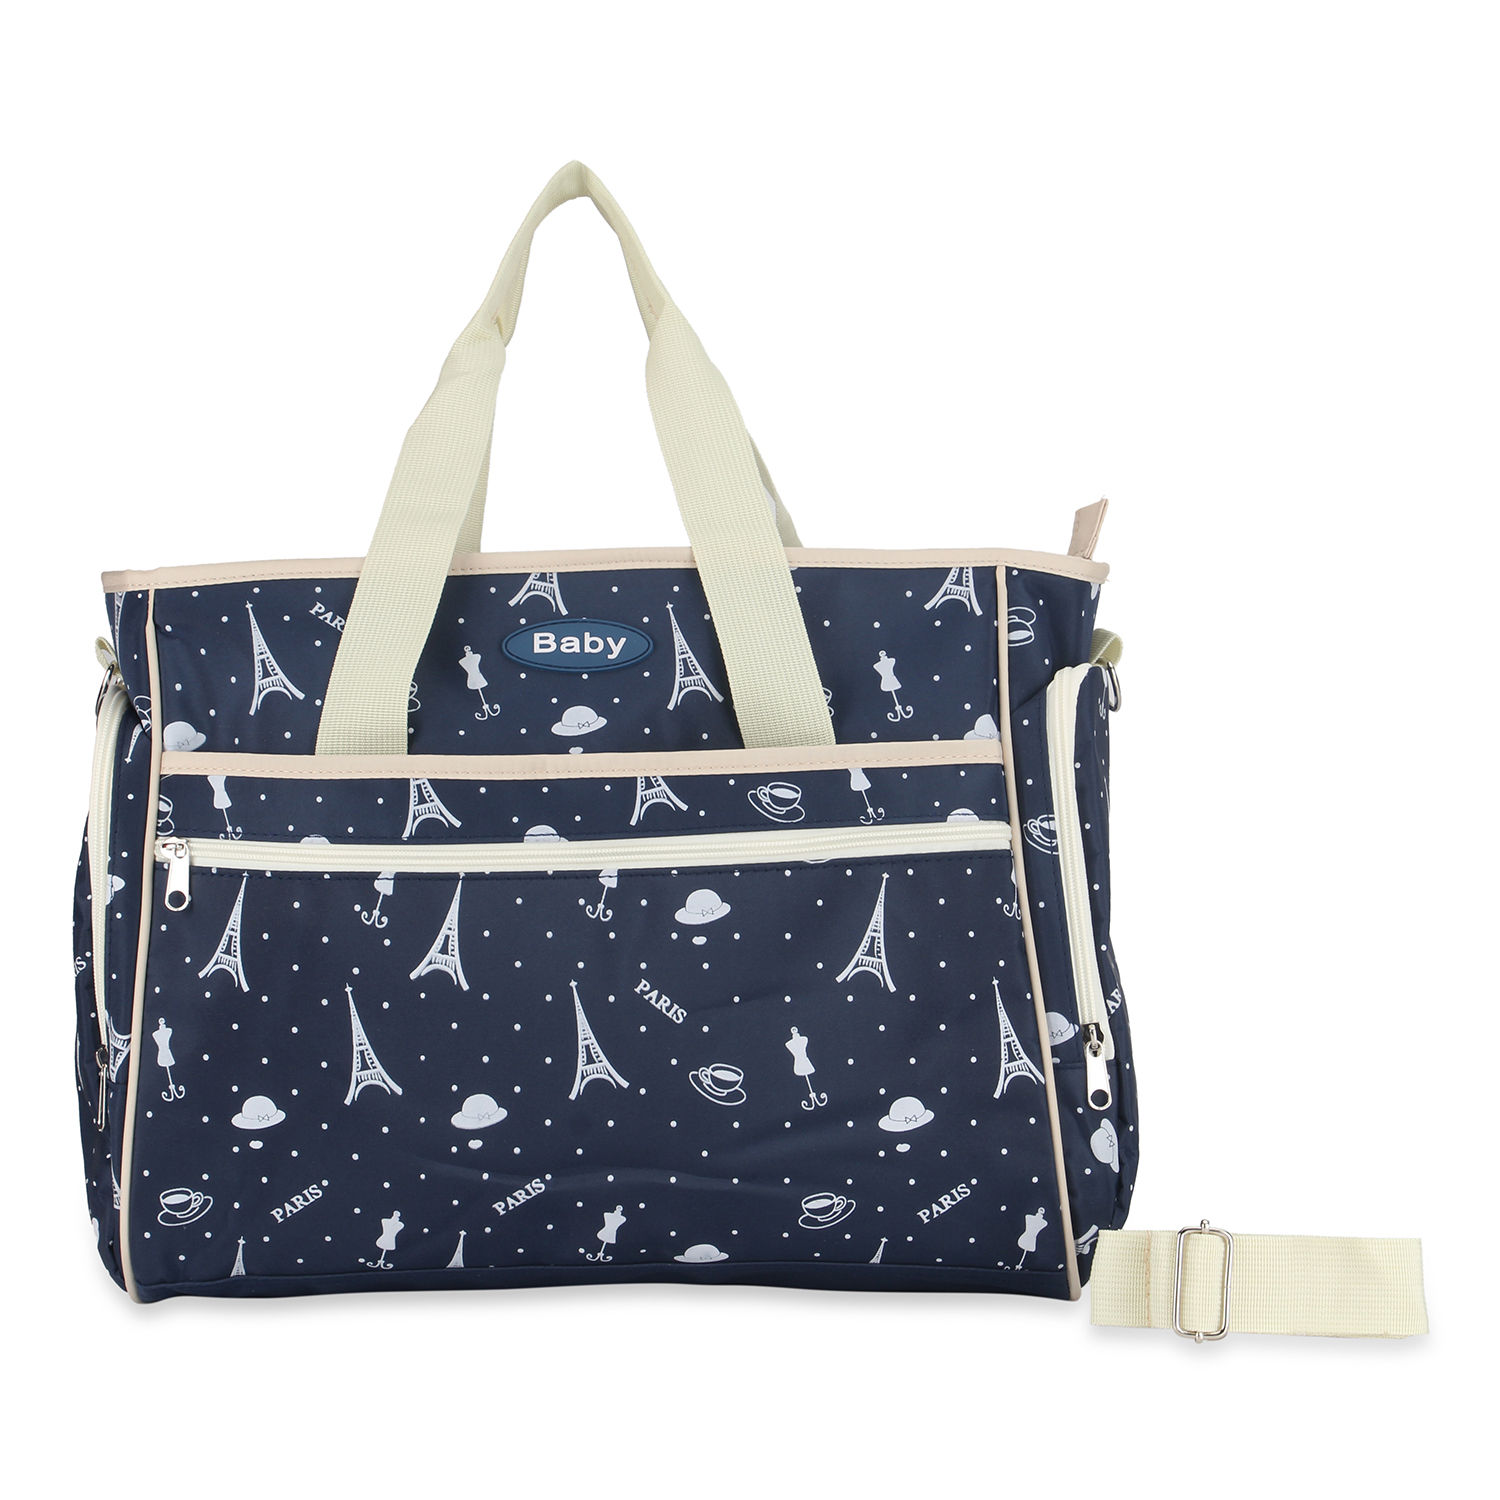 Little Story Ace Diaper Bag Blue Beige Online in UAE, Buy at Best Price  from FirstCry.ae - a38f2ae3a23f3